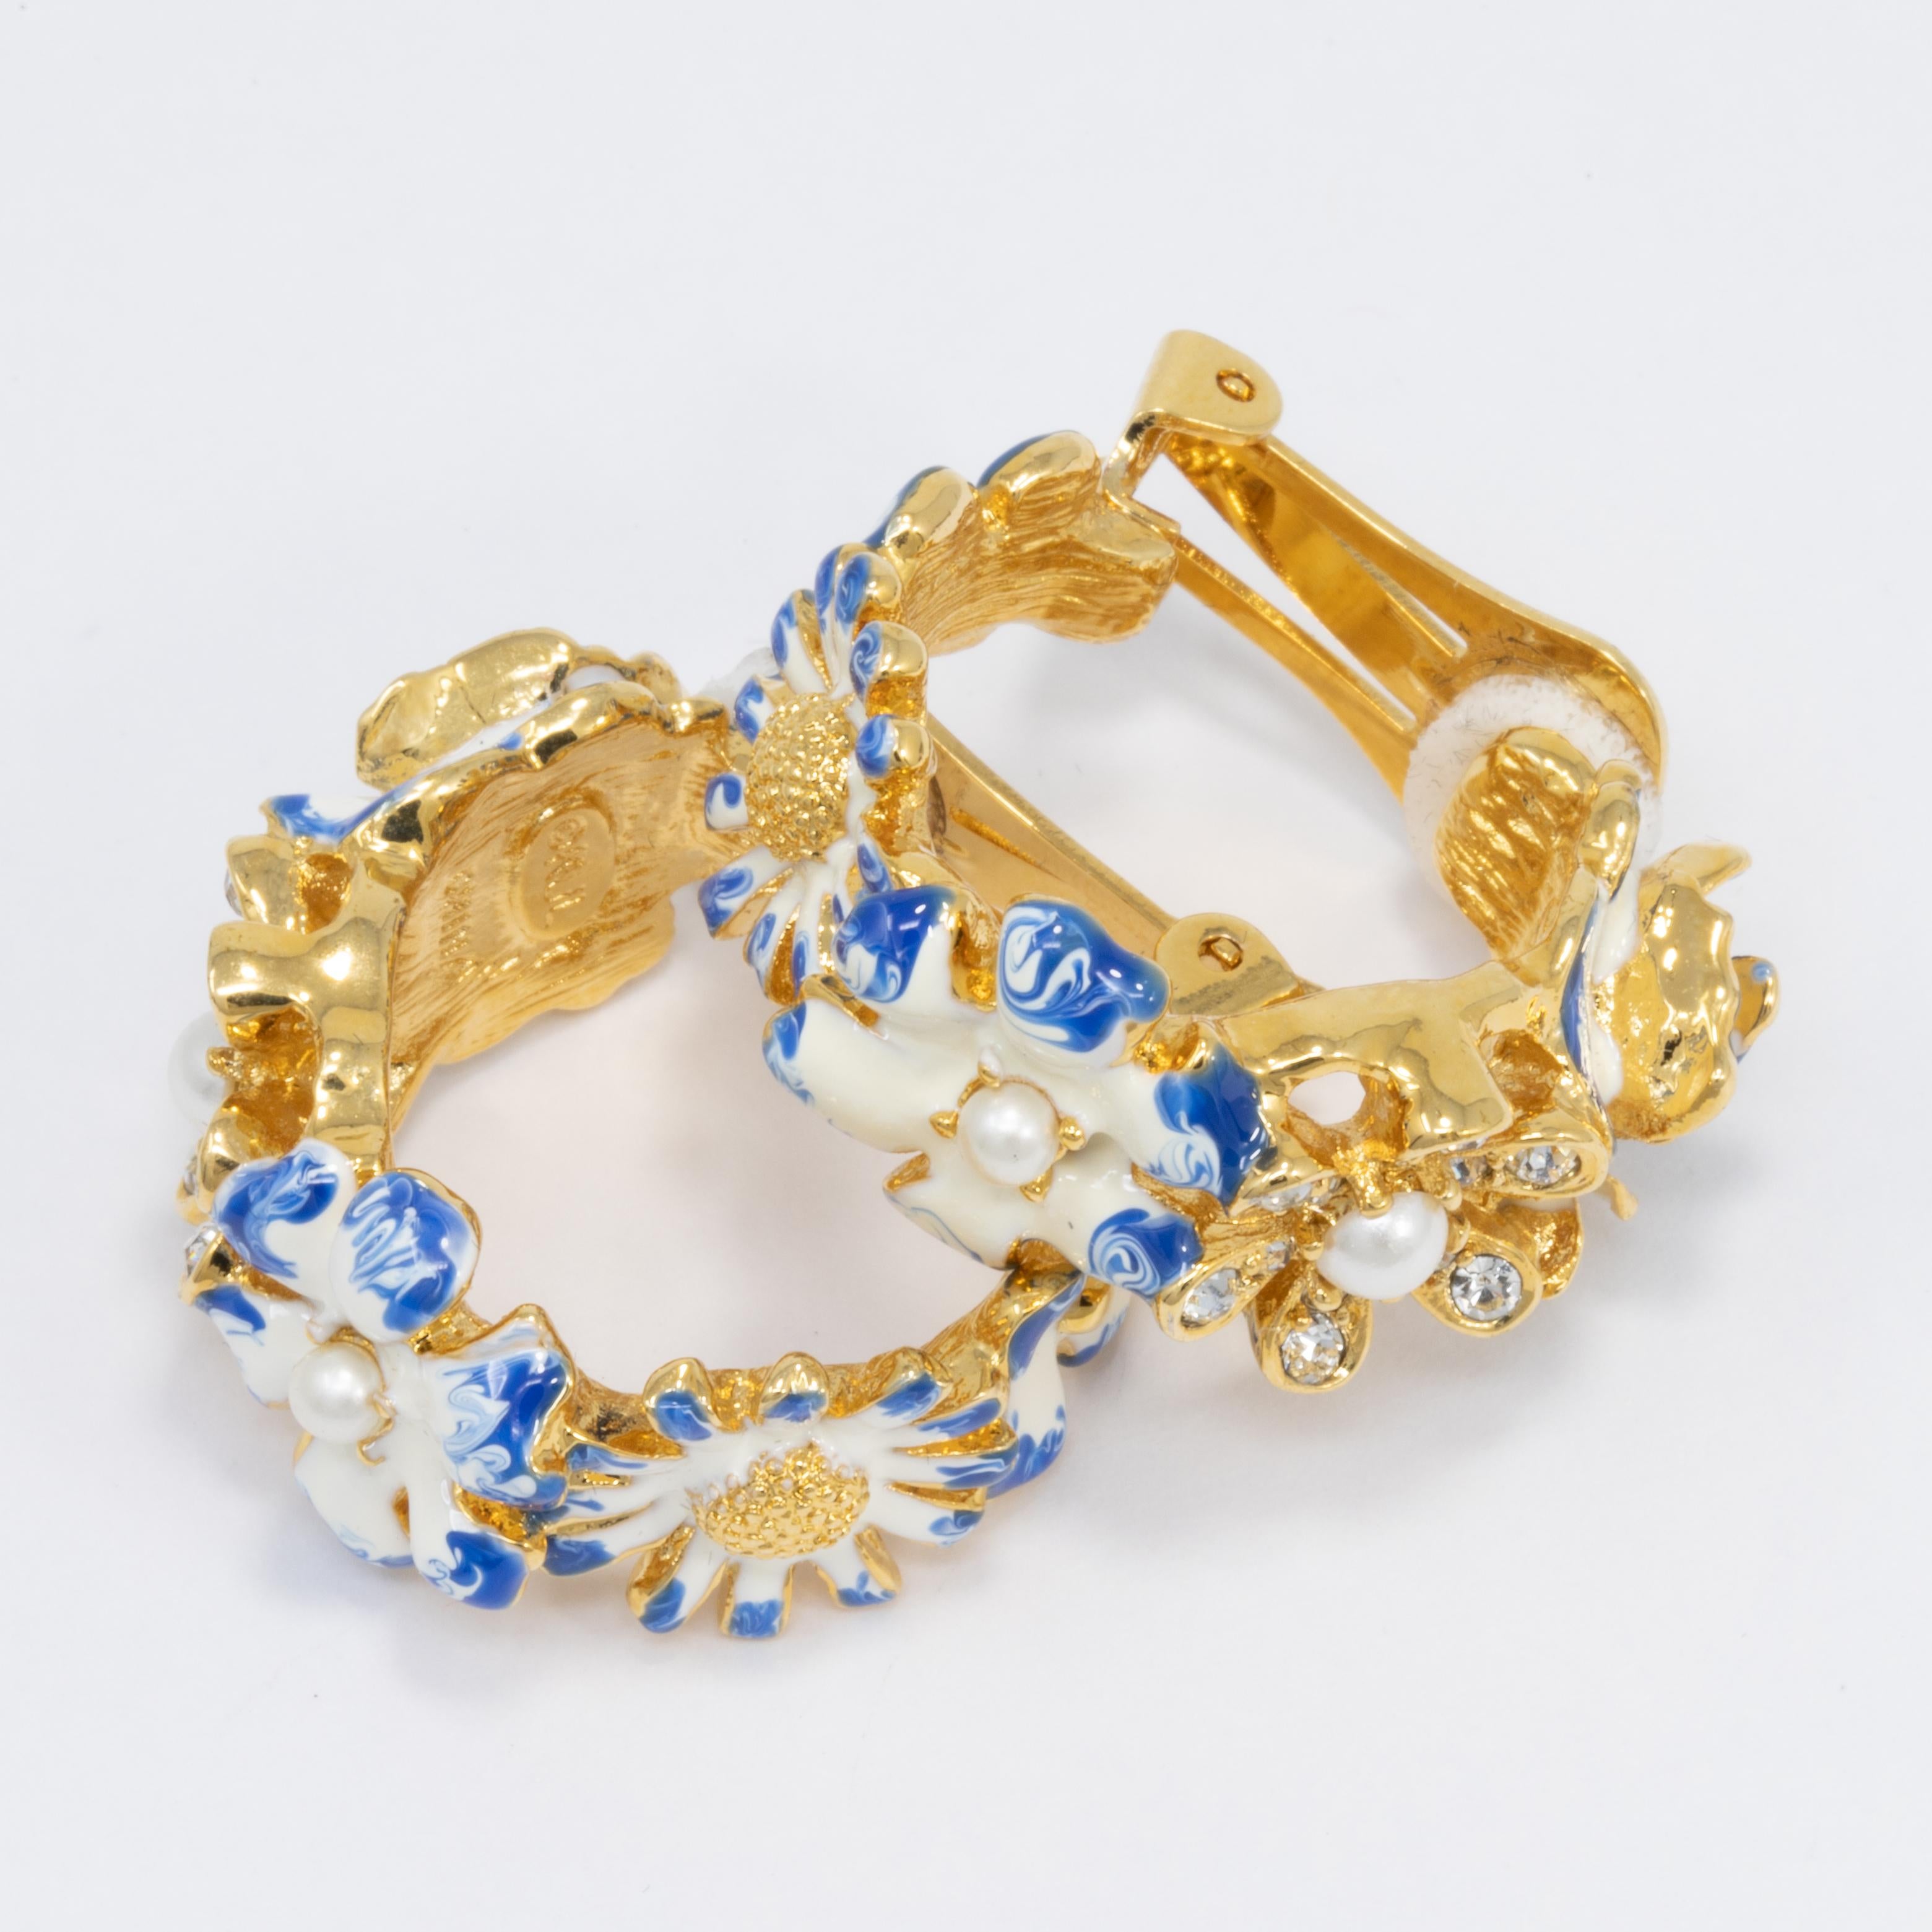 A pair of golden flower earrings, painted in white and blue enamel and accented with faux pearls & crystals. By Kenneth Jay Lane.

Hallmarks: KJL

Gold plated.